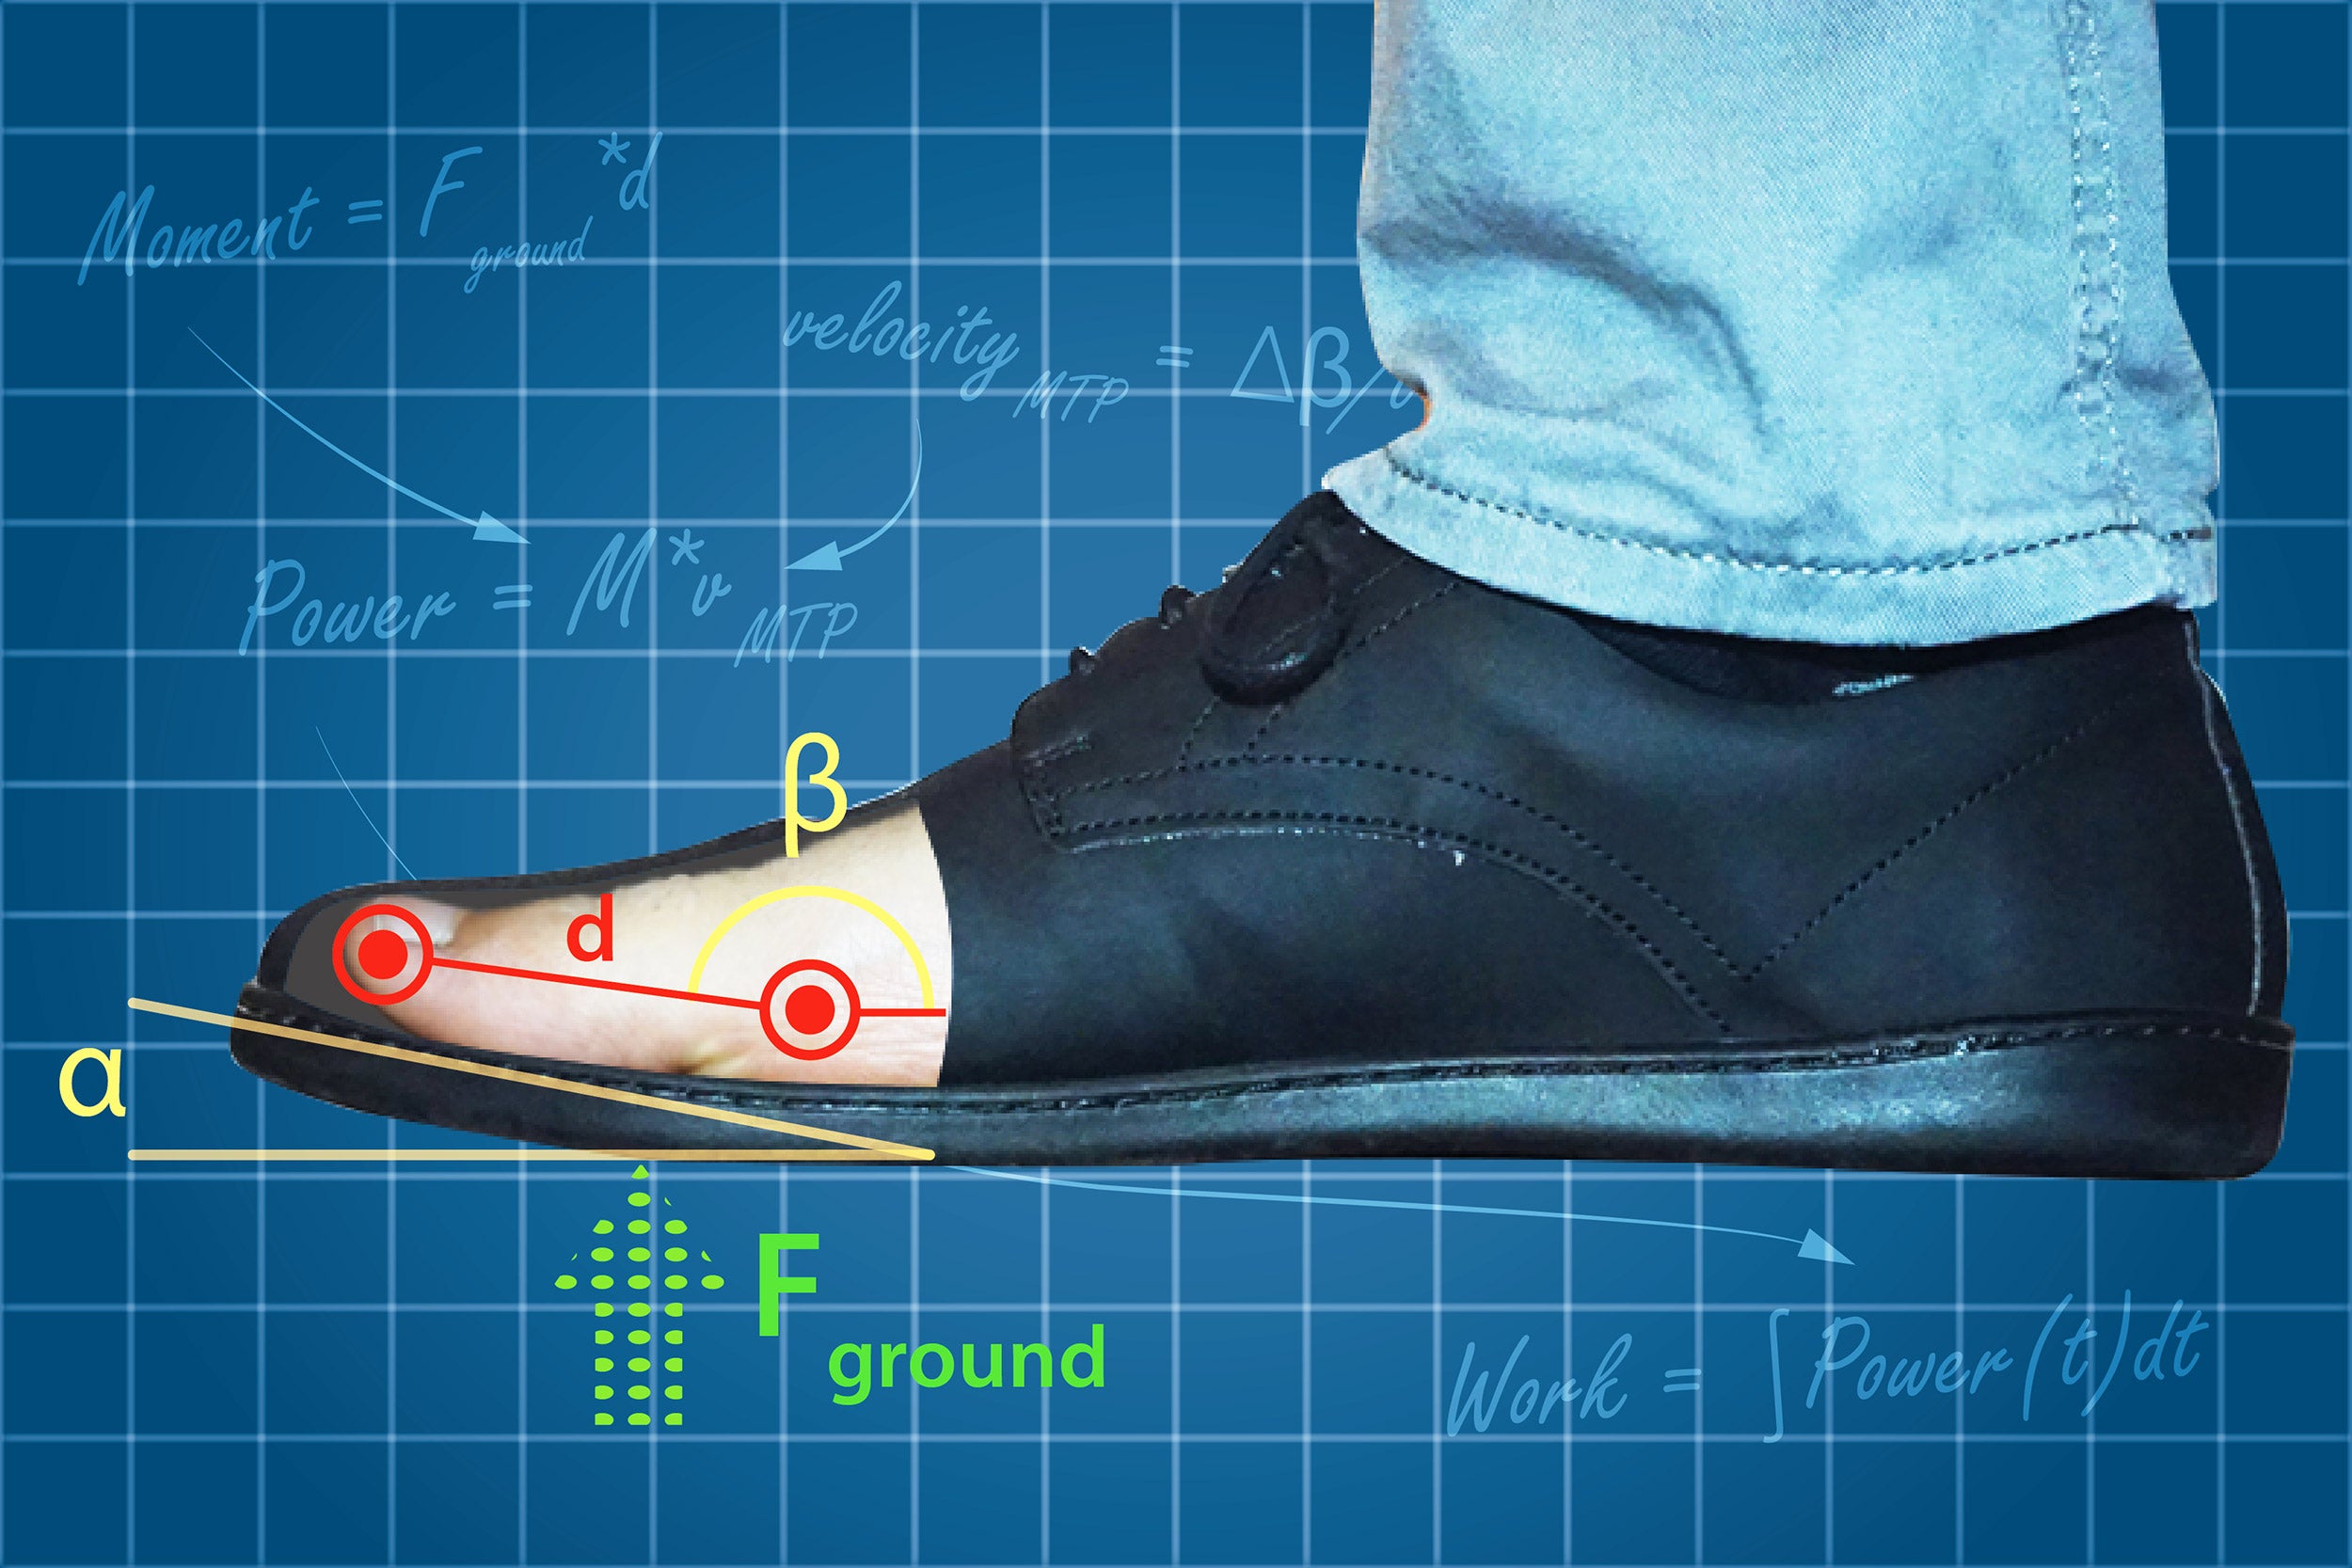 Curve on shoes makes walking easier, but may lead to foot problems —  Harvard Gazette